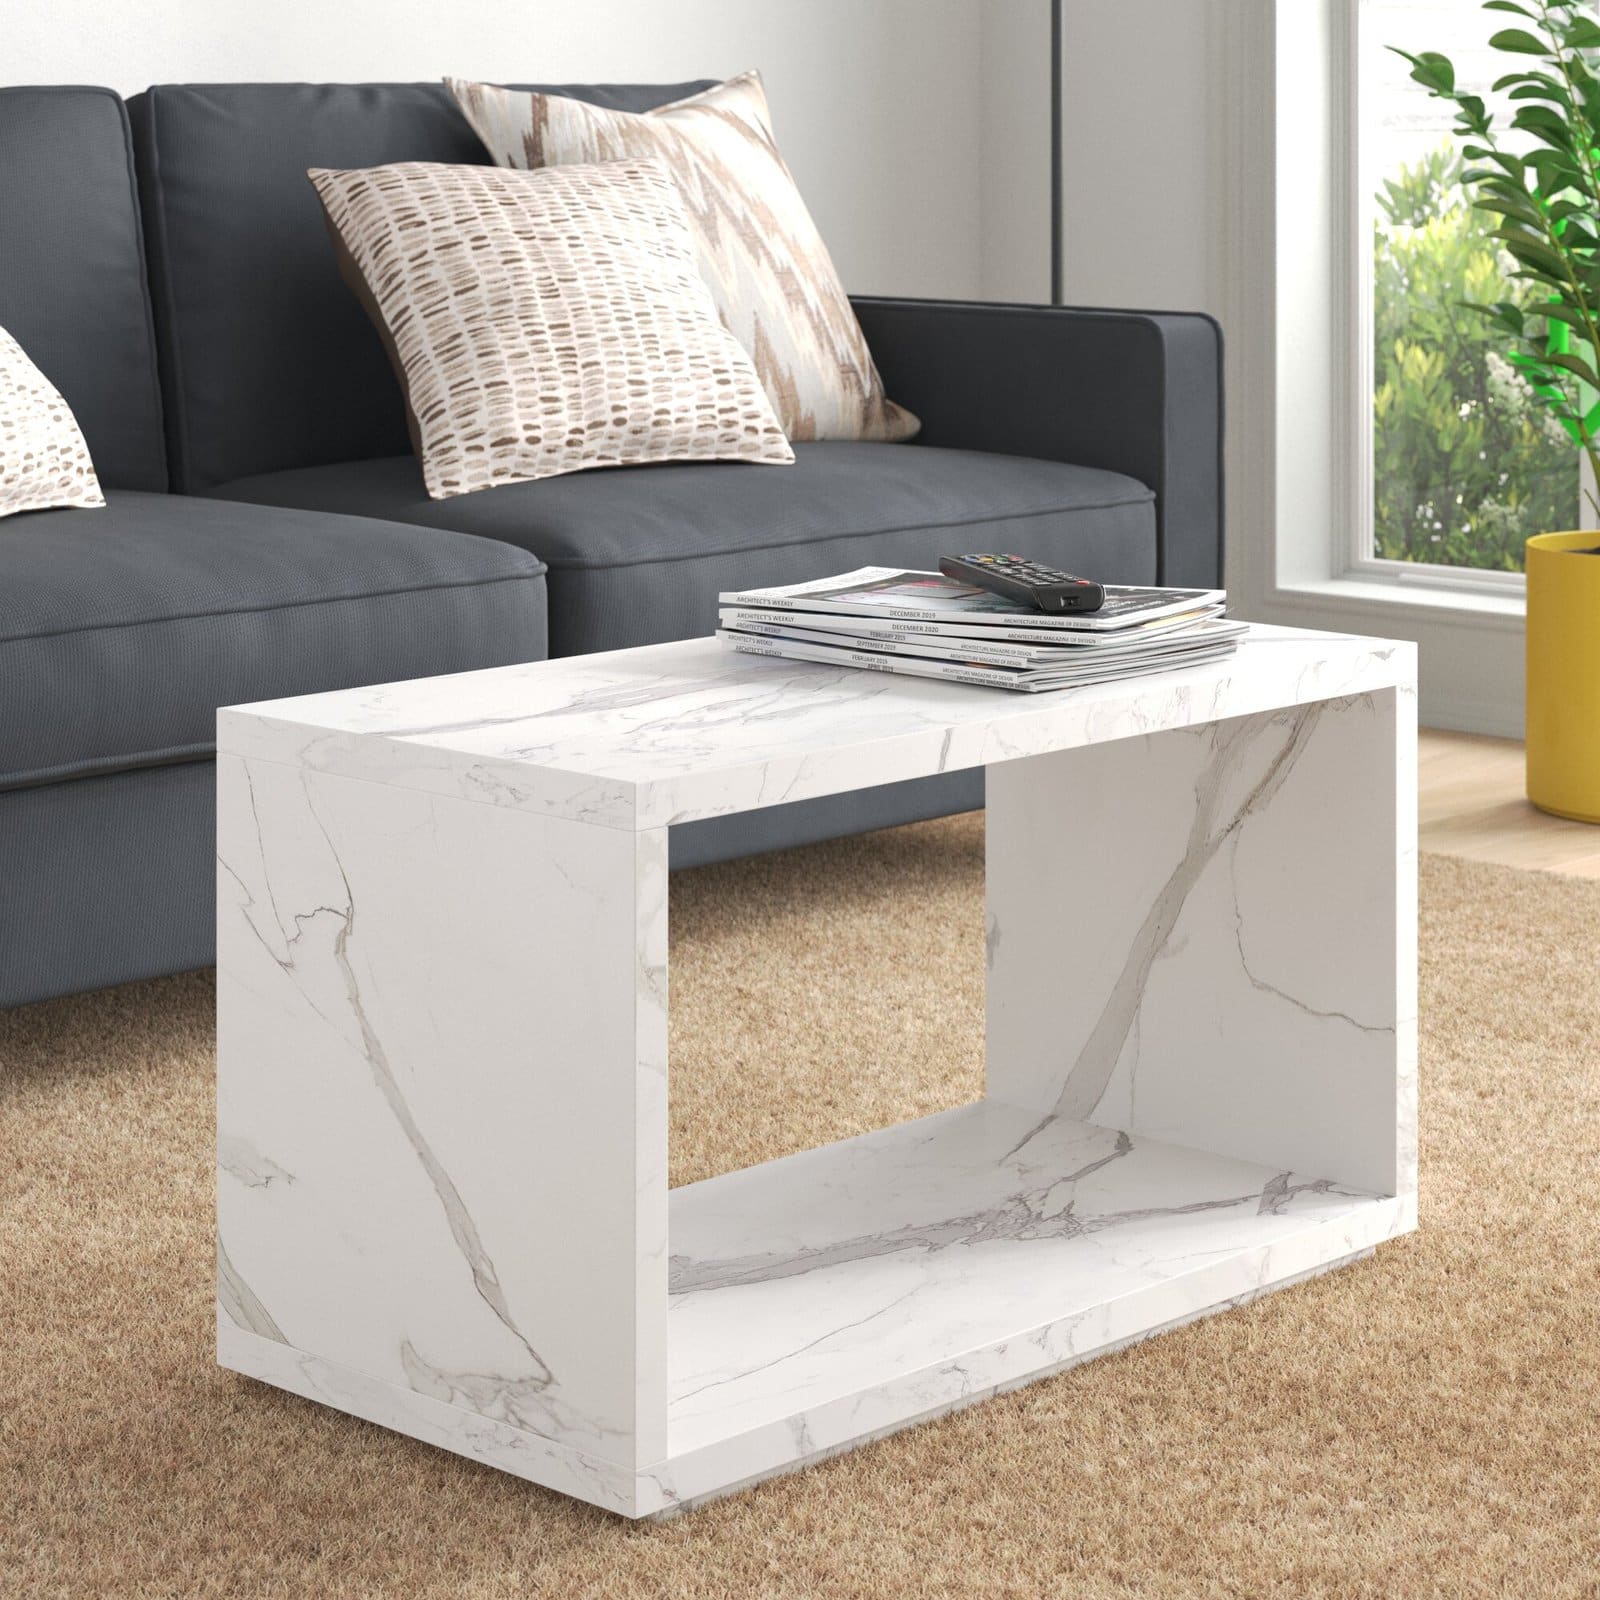 Fit Your Narrow Room with a Floor Shelf Table